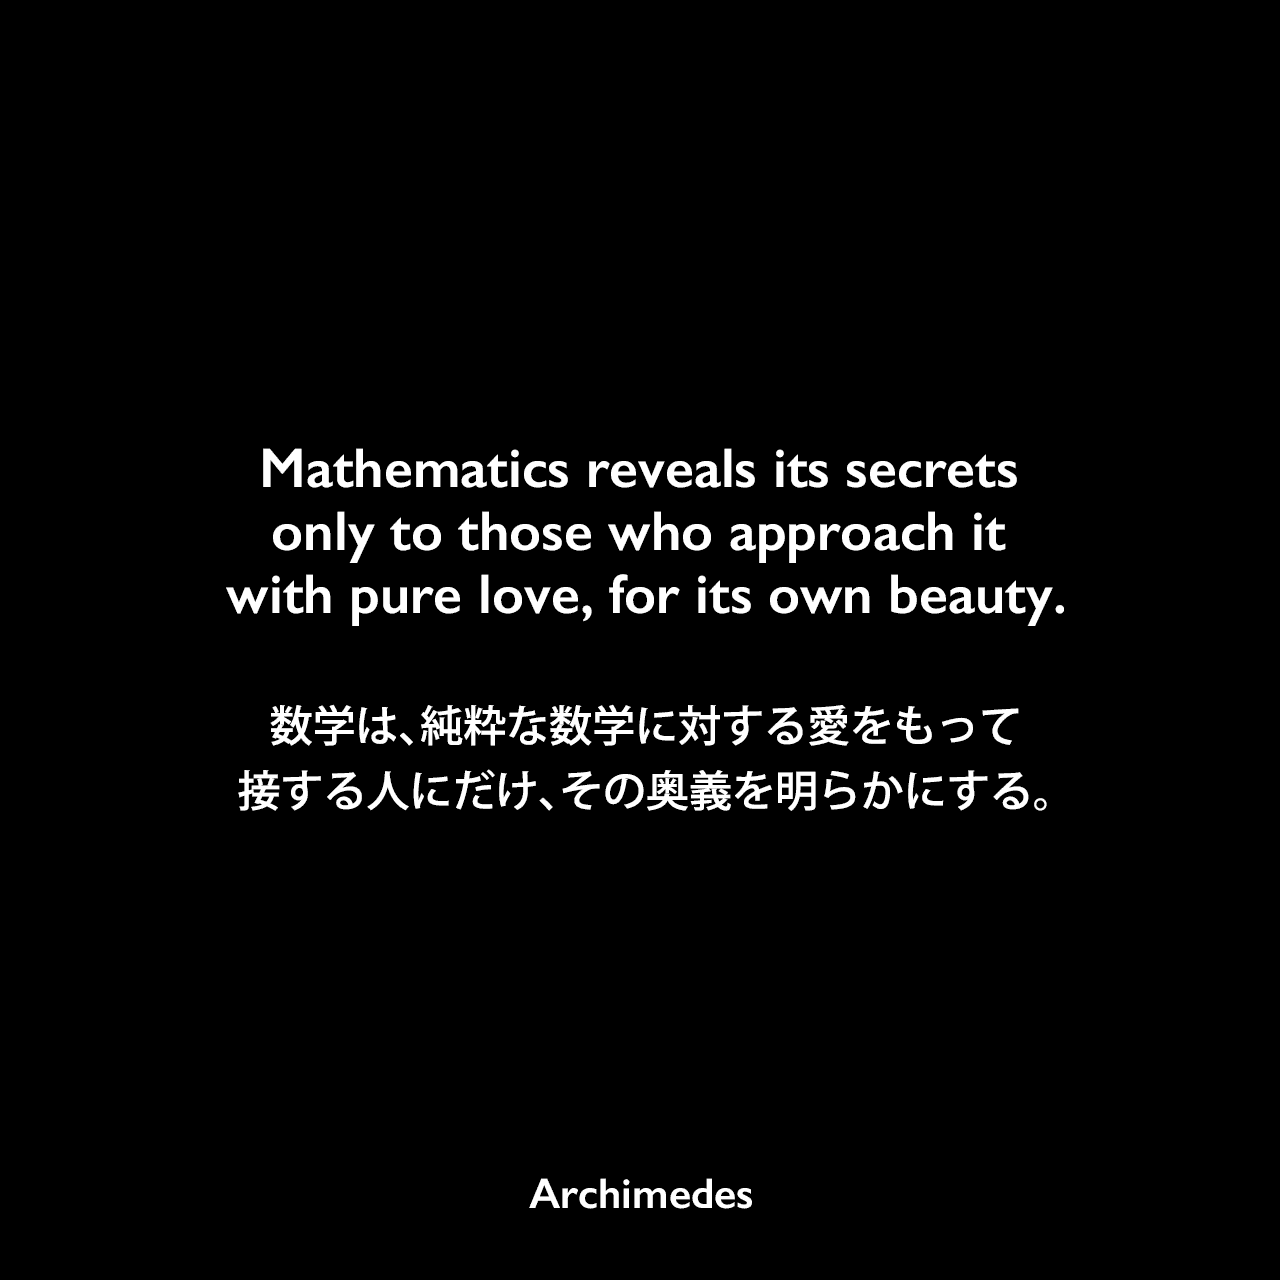 Mathematics reveals its secrets only to those who approach it with pure love, for its own beauty.数学は、純粋な数学に対する愛をもって接する人にだけ、その奥義を明らかにする。Archimedes